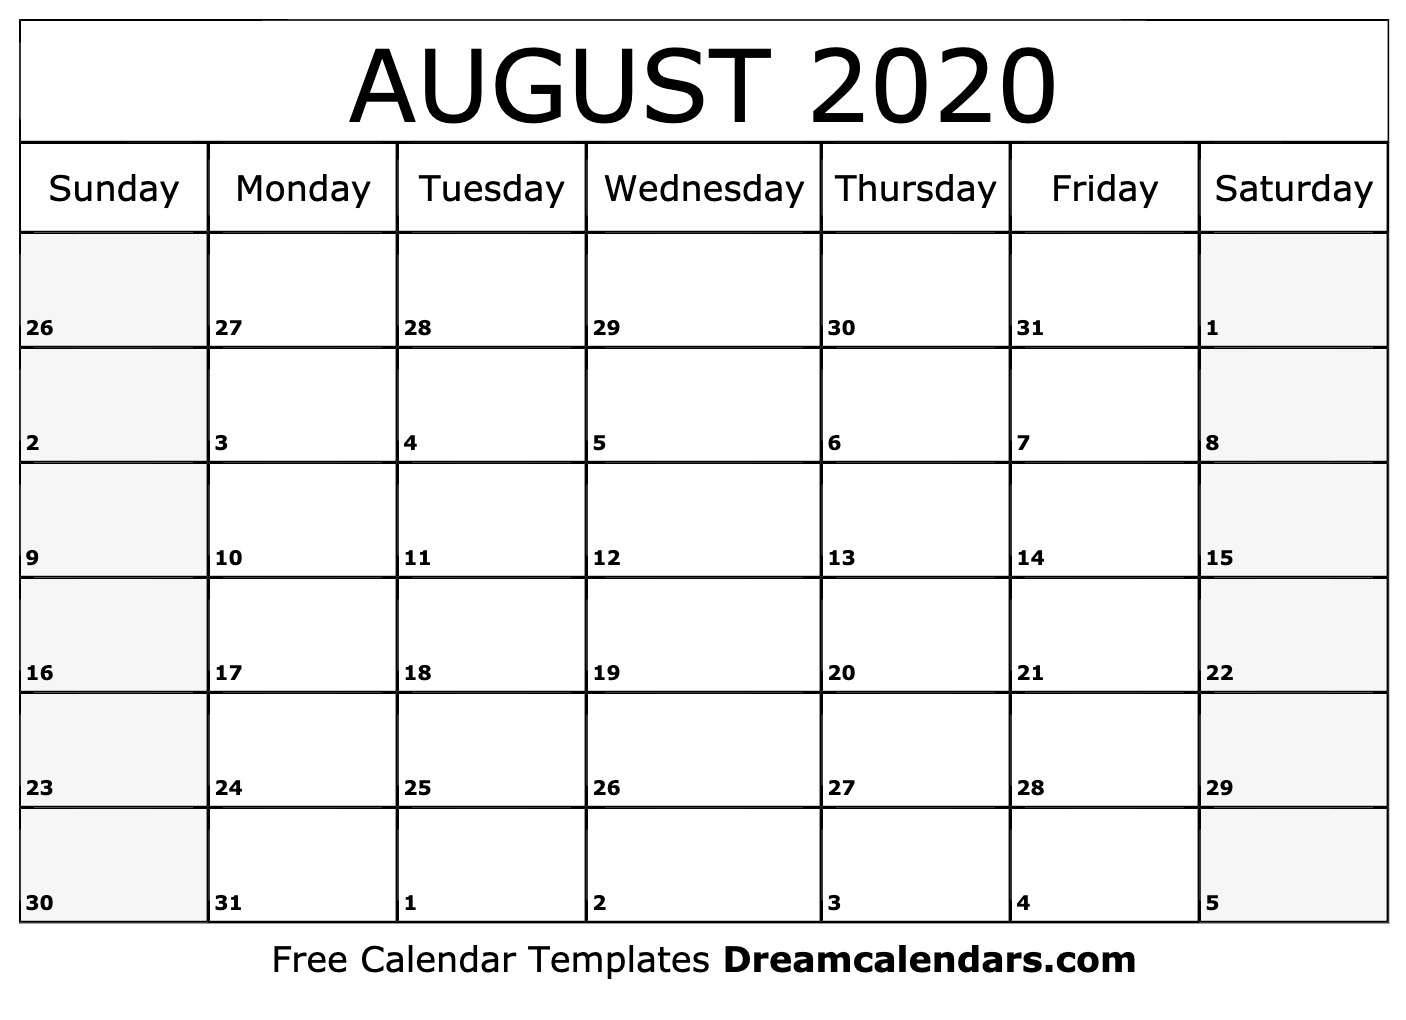 August 2020 Calendar Free Blank Printable With Holidays